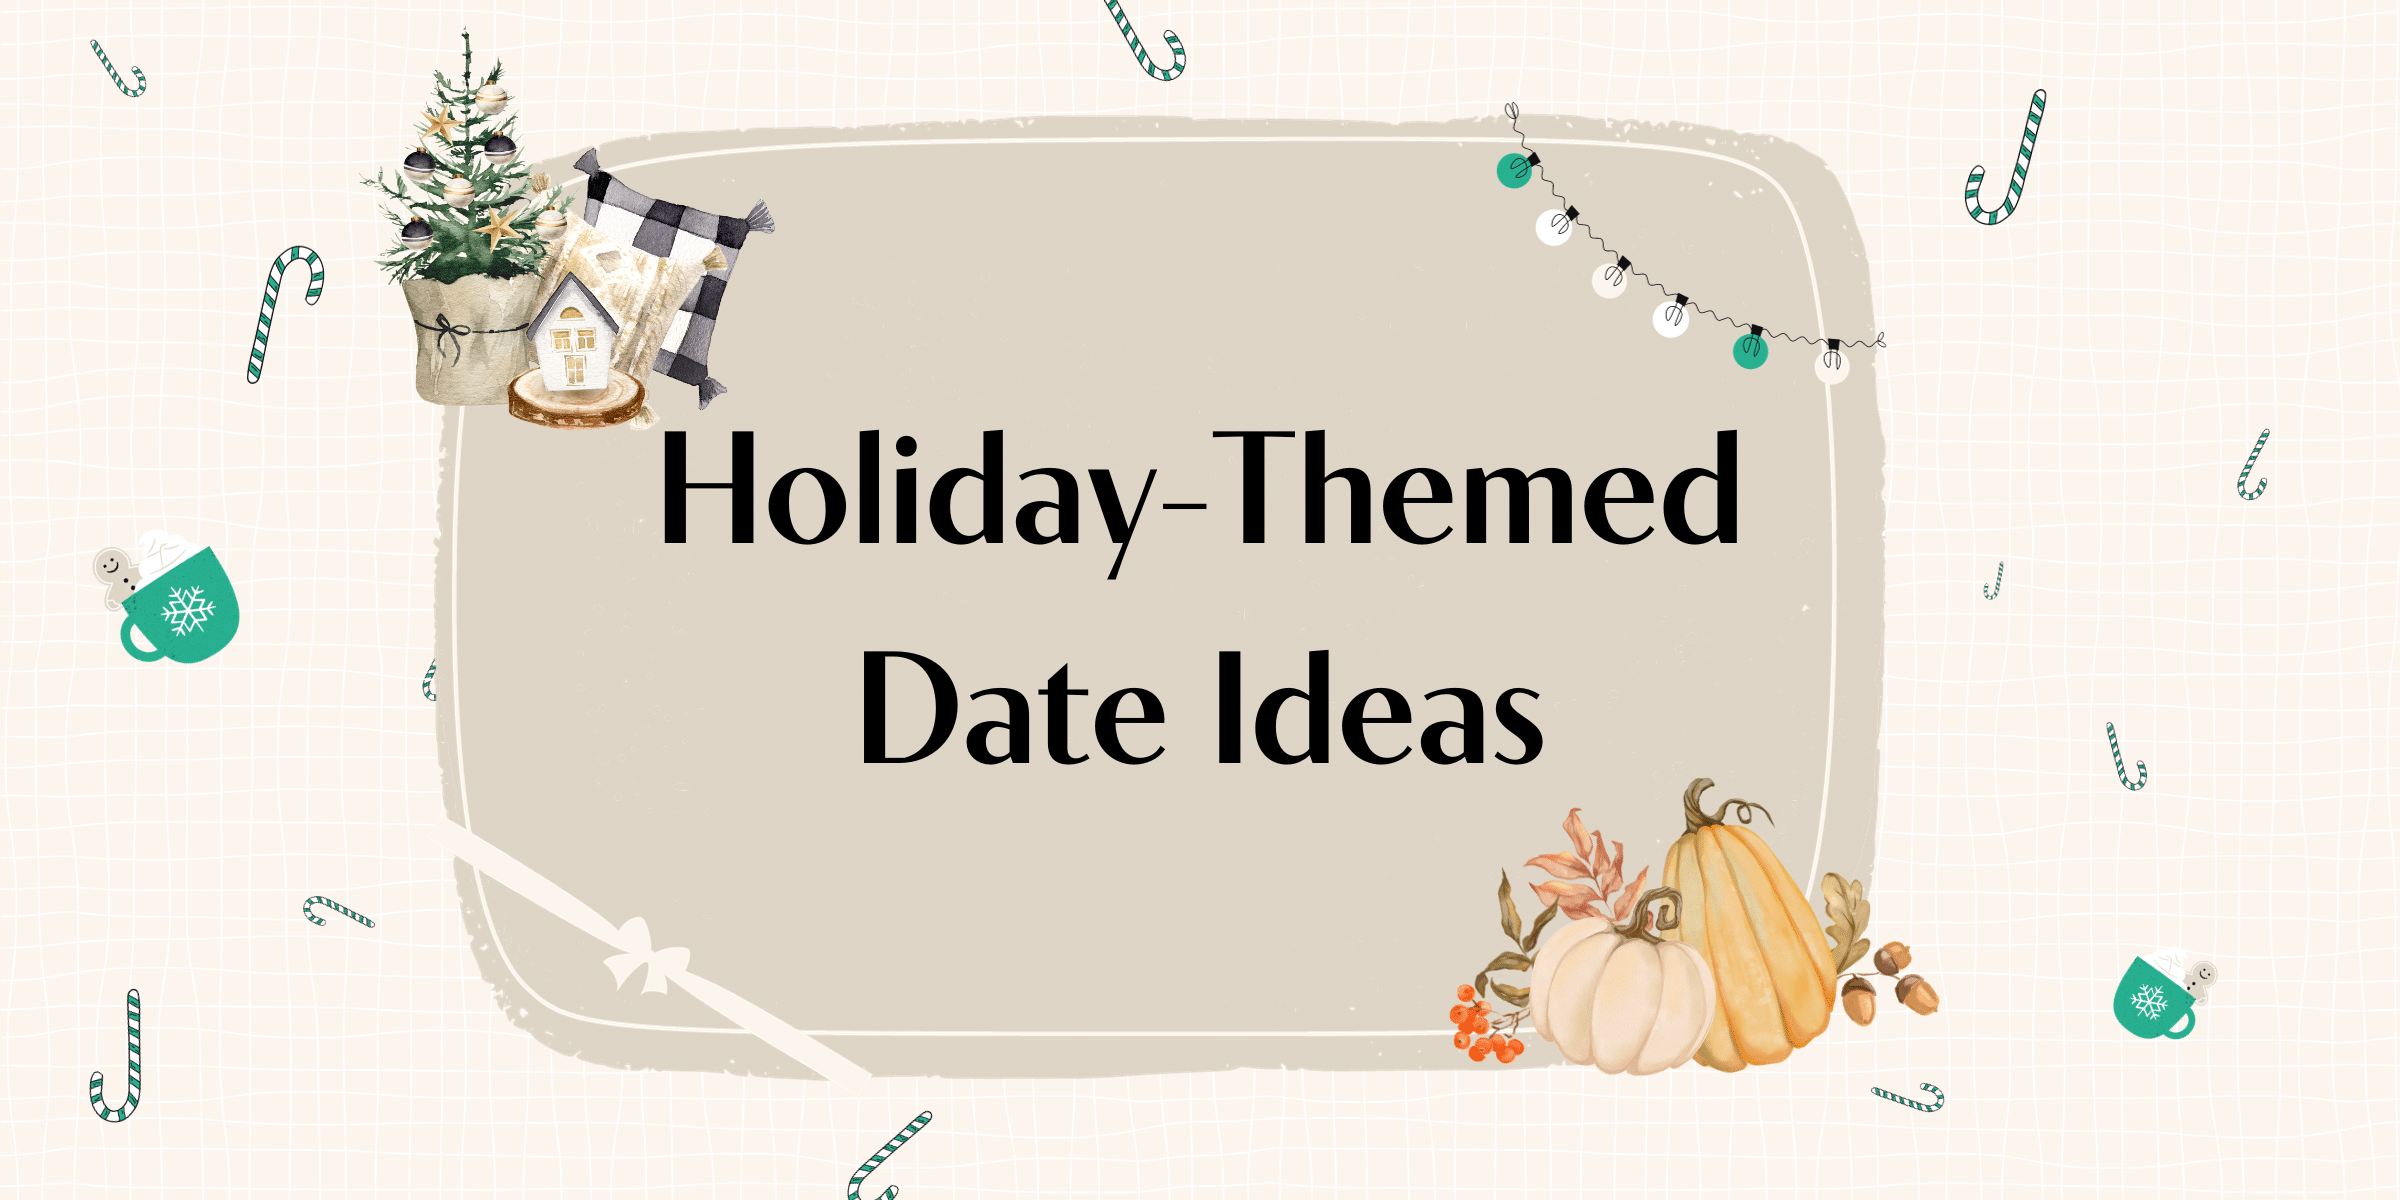 From ice skating to creating the 12 dates of Christmas, these Christmas date ideas will have you swooning. Get all 9 holiday date ideas right here.